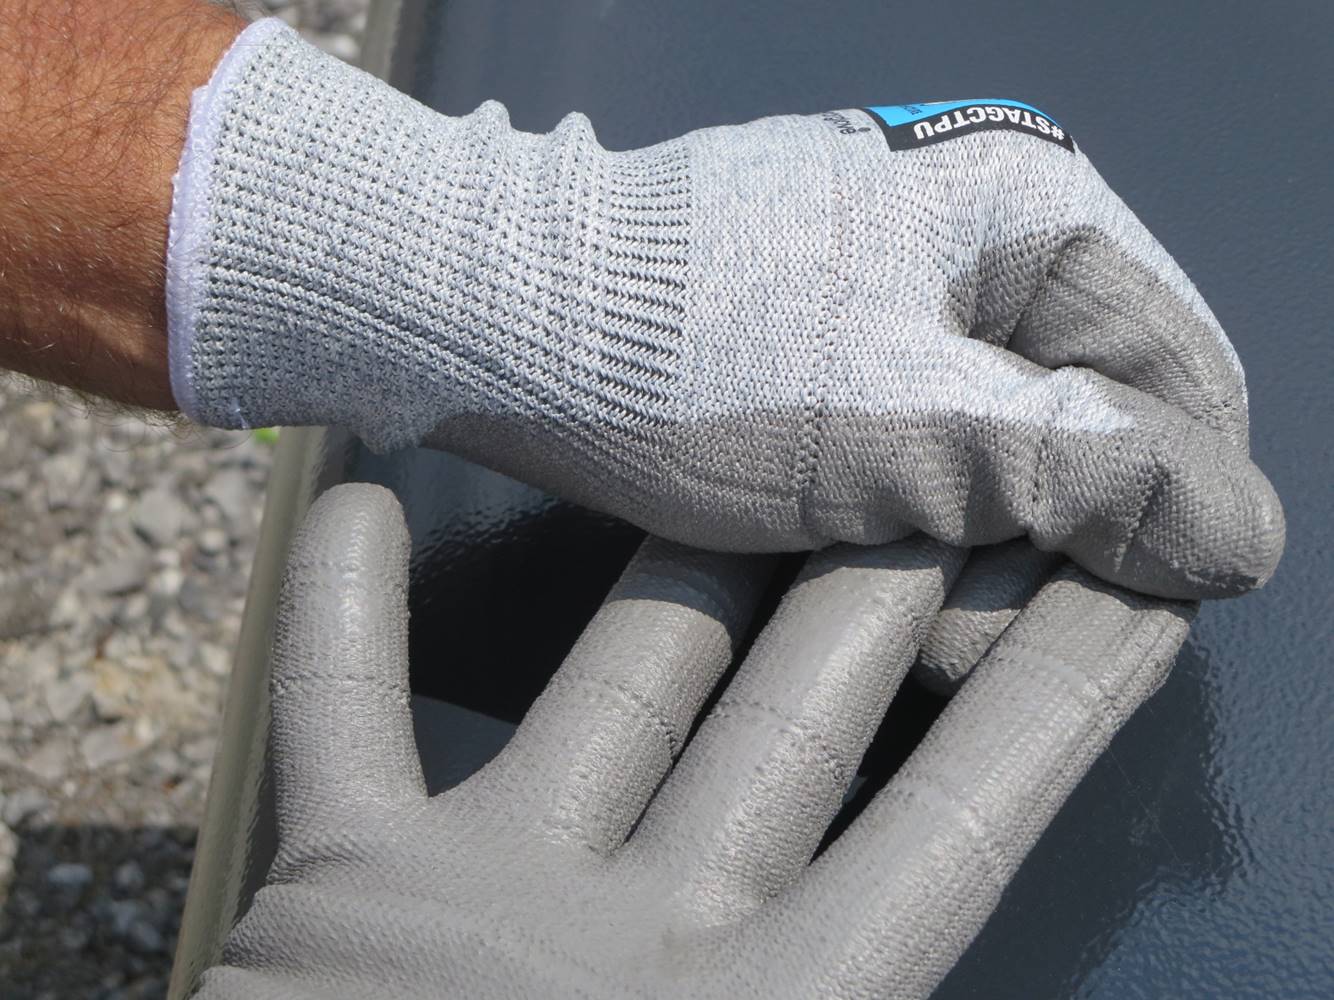 These Cut-Resistant Gloves Are Gonna Make Sure You Don't Cut Your Fingers  Off